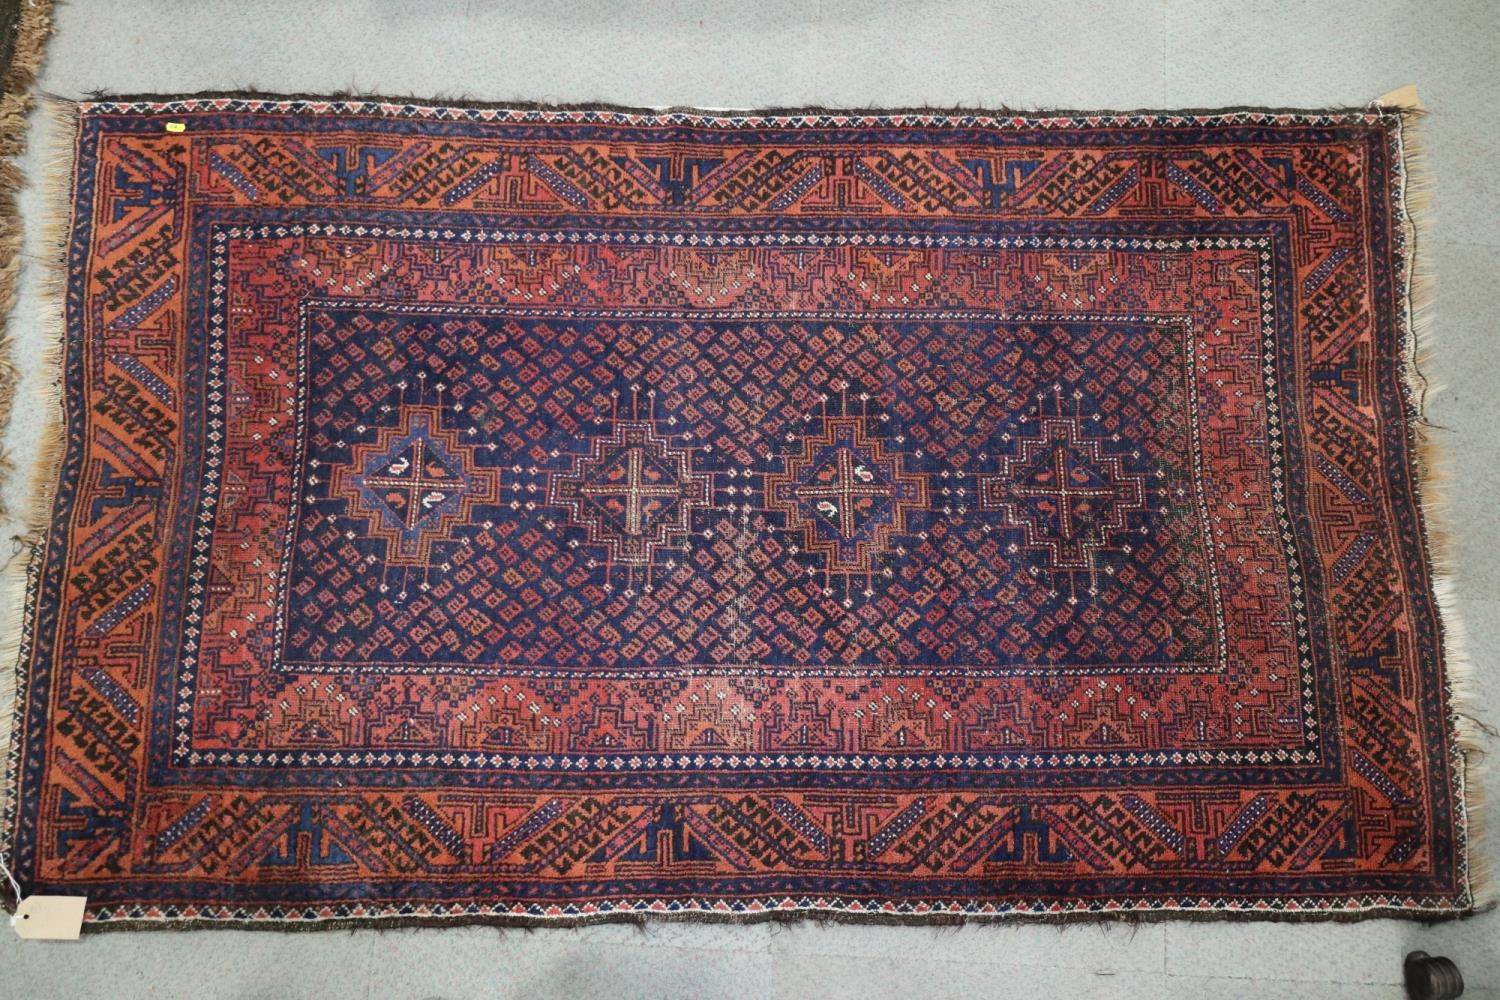 A Bokhara type rug with four stepped medallions on a blue ground with geometric borders in shades of